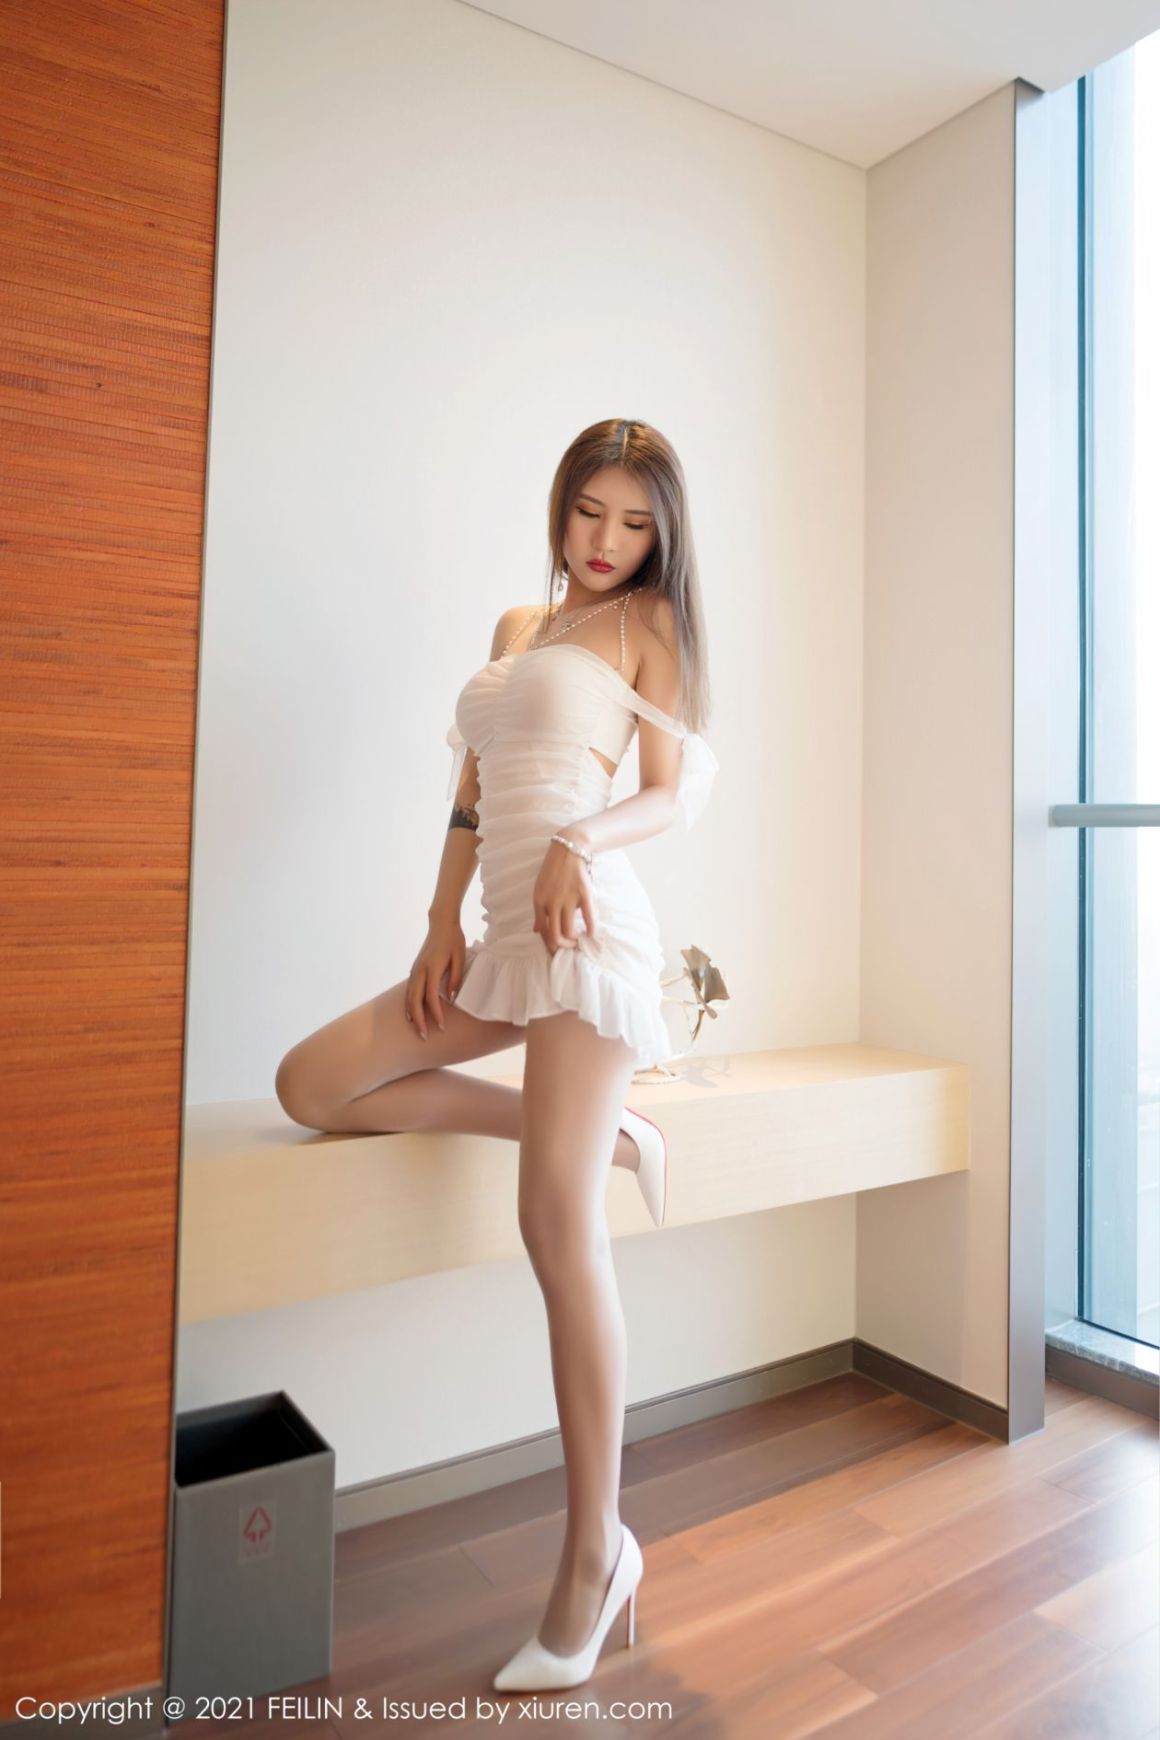 AsianOnlyfans.com 41 153 20211008